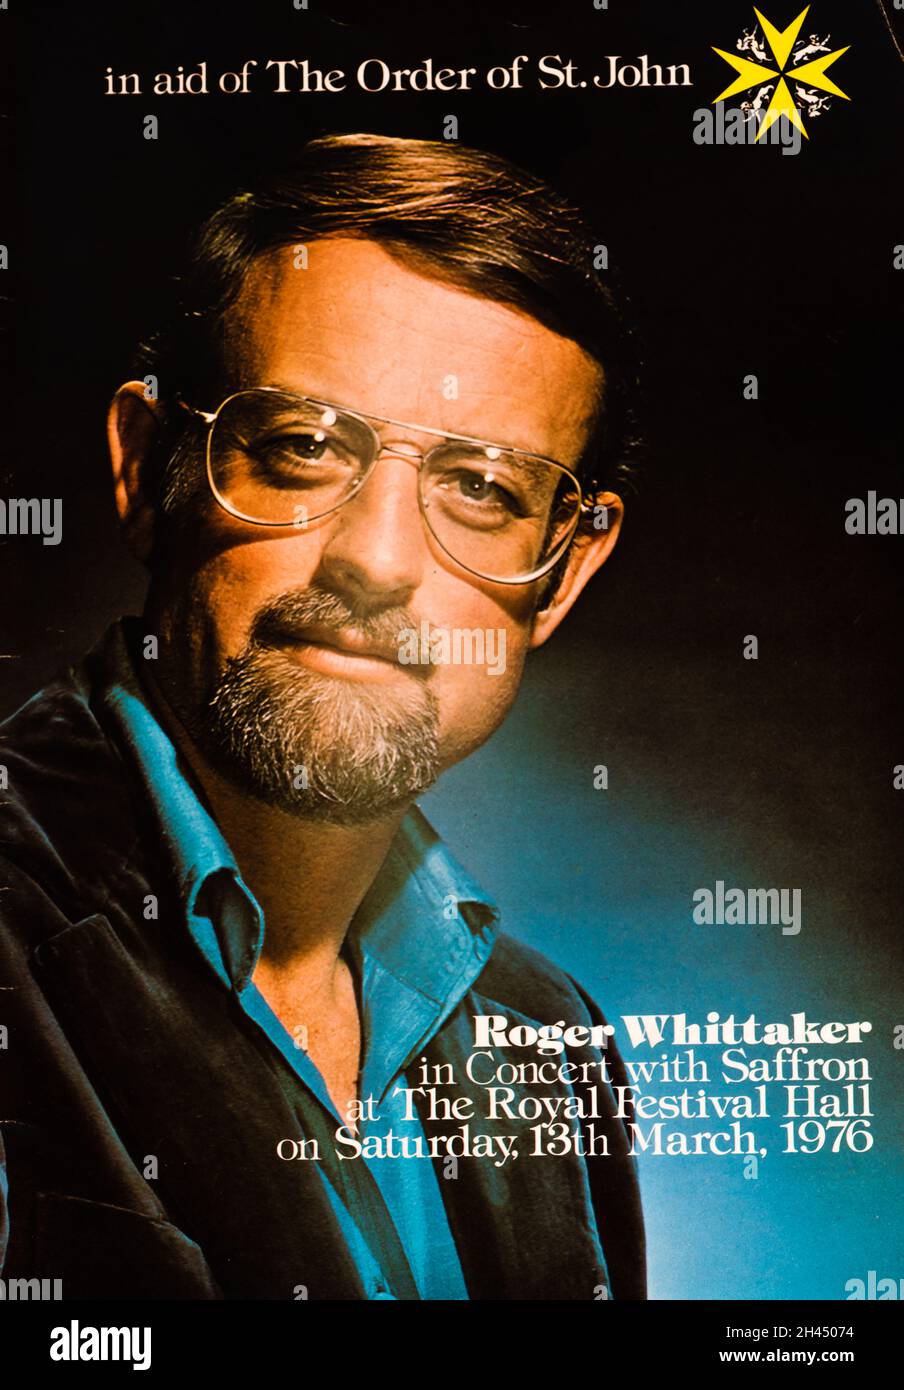 Memories of EMI - Programme of Roger Whittaker in Concert at The Royal Festival Hall, 13th March 1976. Stock Photo